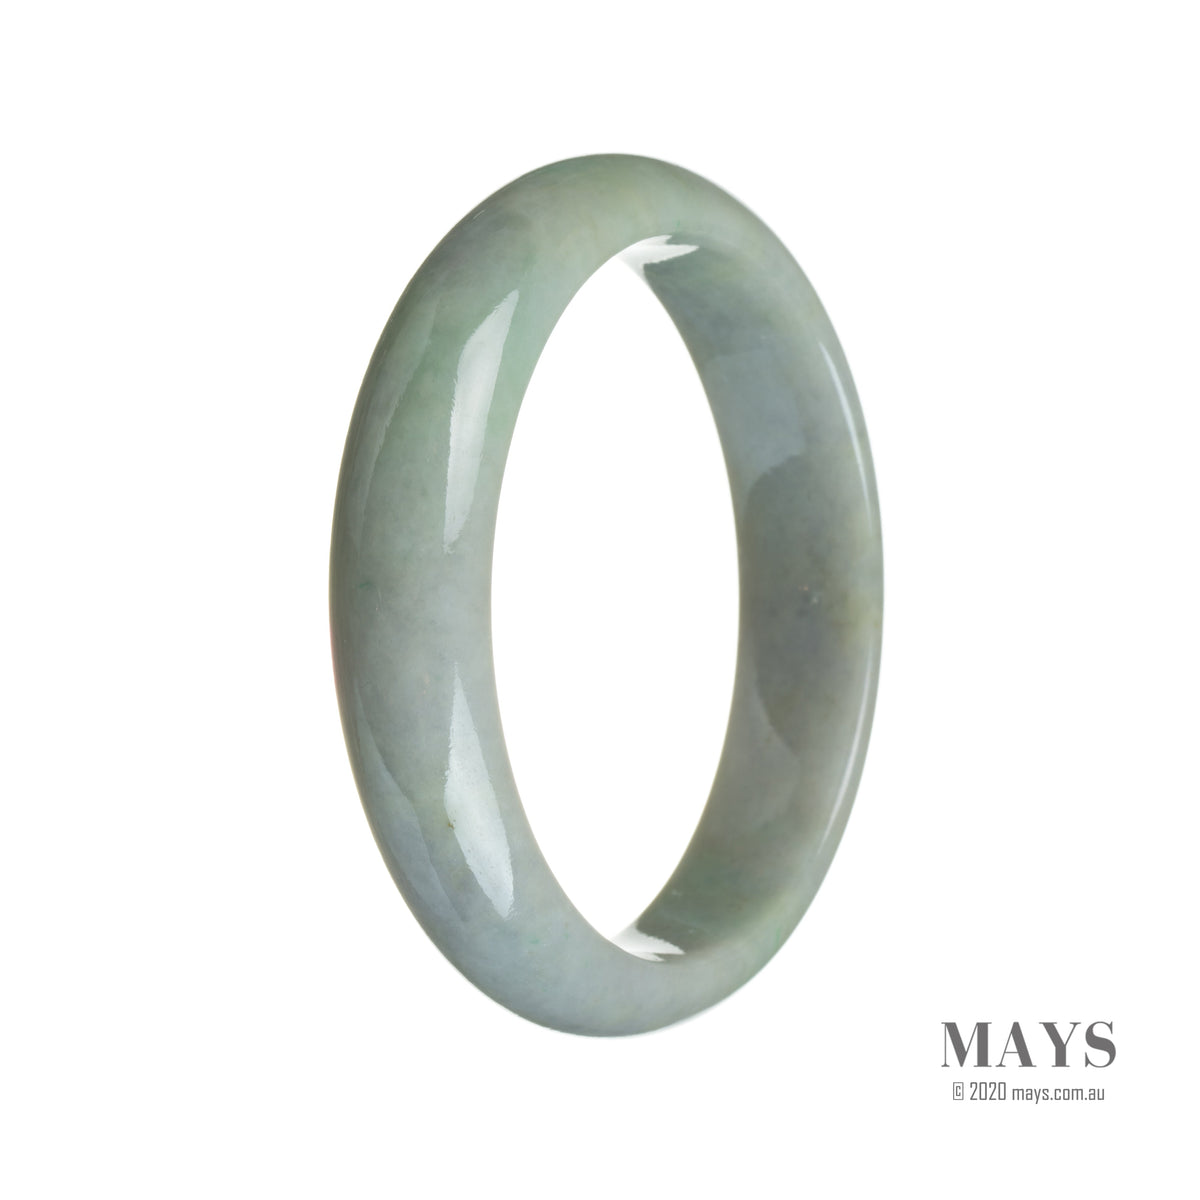 A close-up image of a beautiful green on white jade bangle bracelet, with a half moon shape, showcasing its genuine Grade A quality. Perfect for adding a touch of elegance to any outfit.